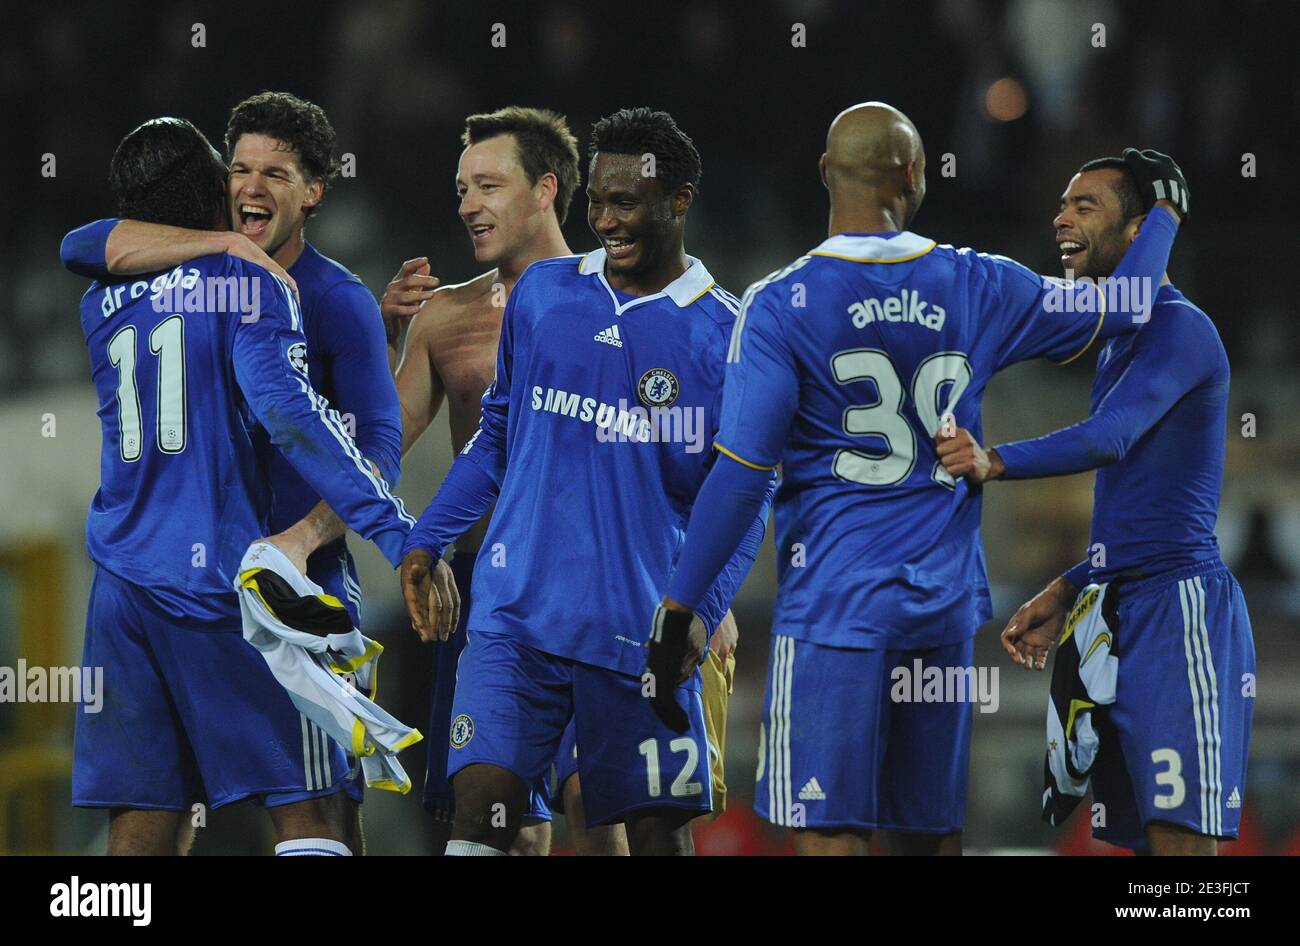 Chelsea's Didier Drogba, Frank Lampard, John Terry, John Mikel Obi, Nicolas Anelka and Ashley Cole celebrate after the final whistle the Champions League second leg first knockout round soccer match, Juventus vs Chelsea at the Olympic stadium in Turin, Italy on March 10, 2009. The match ended in a 2-2 draw and Chelsea goes through on aggregate. Photo by Steeve McMay/ABACAPRESS.COM Stock Photo